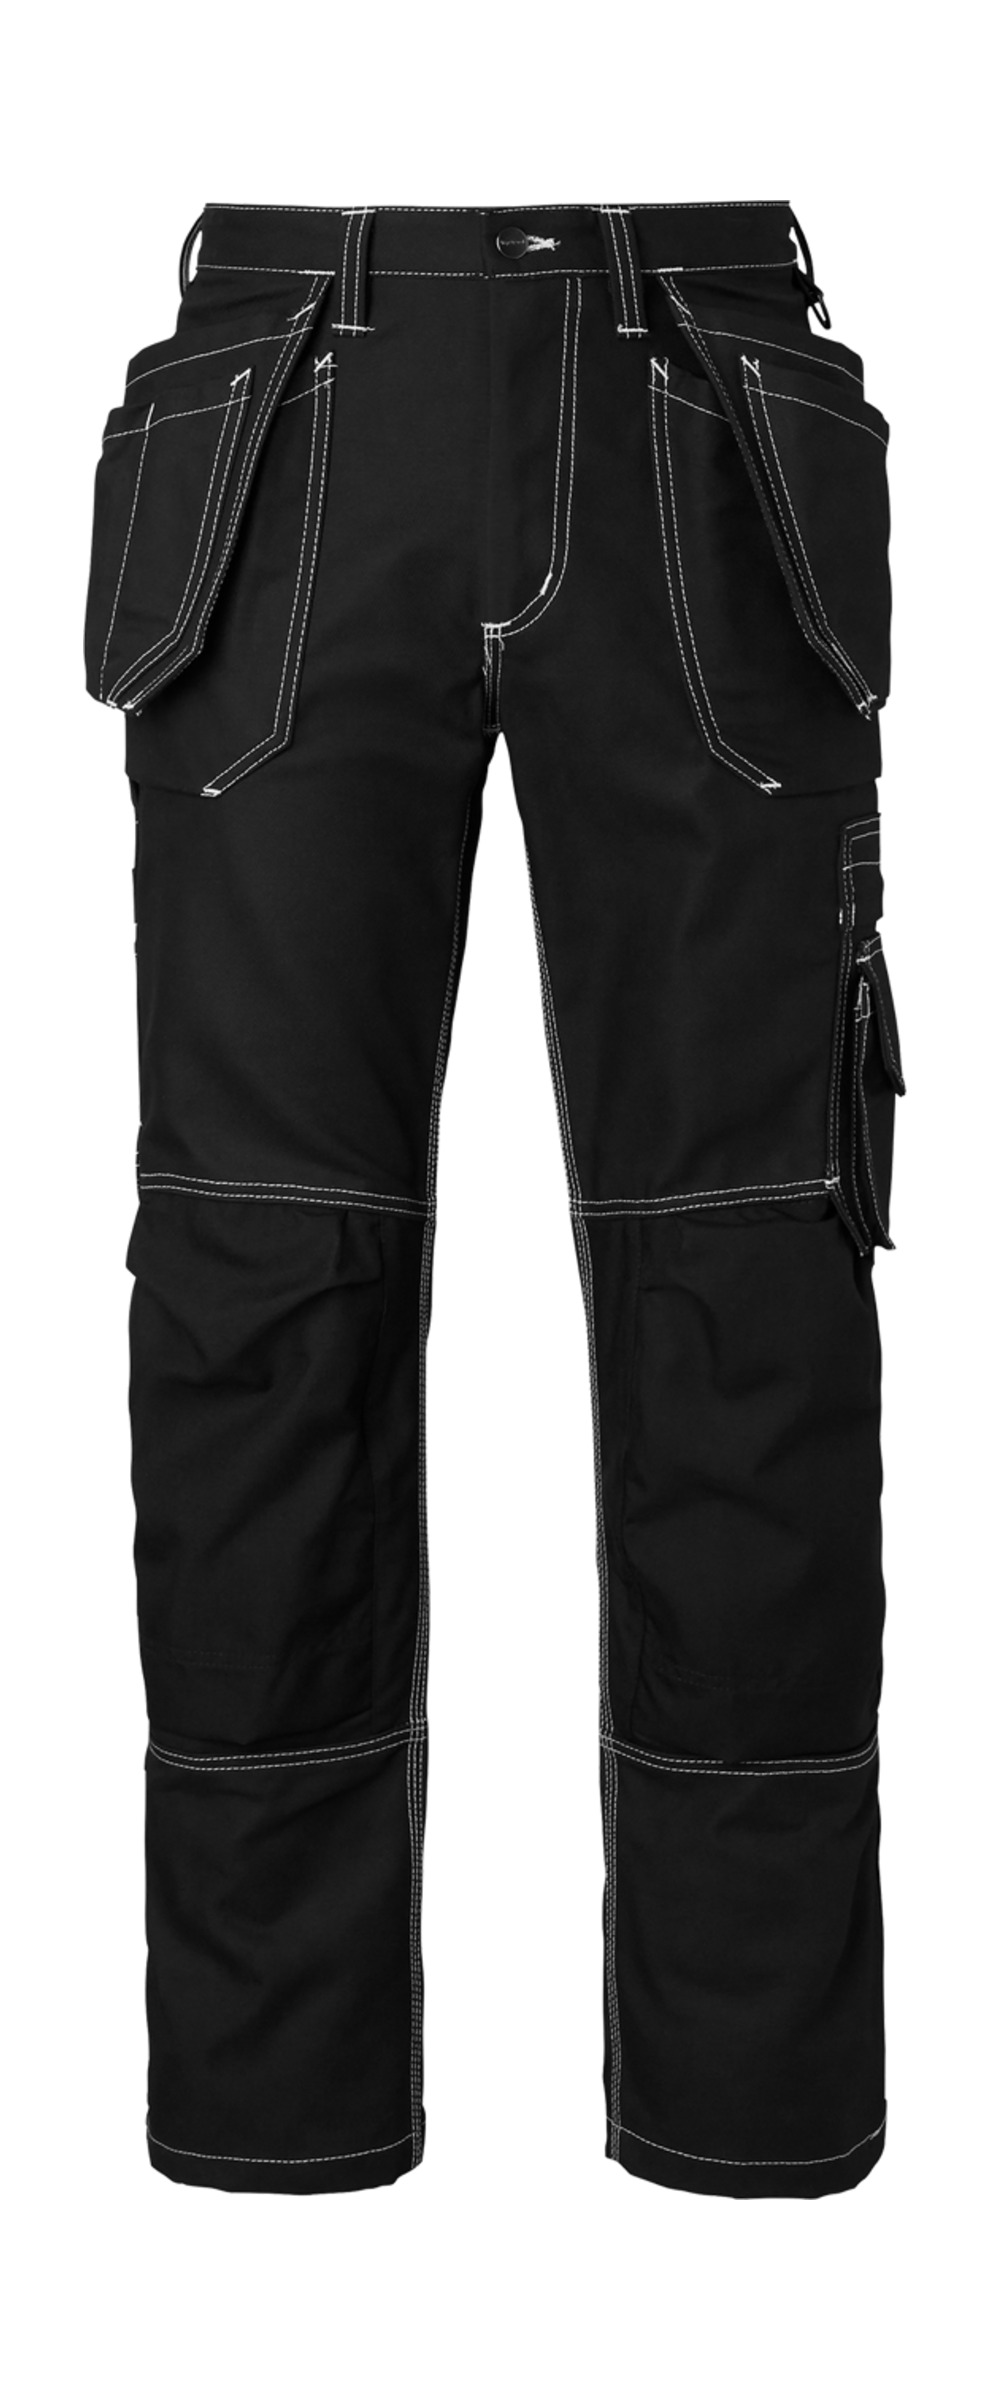 Top Swede 2515 Craftsmen Trousers